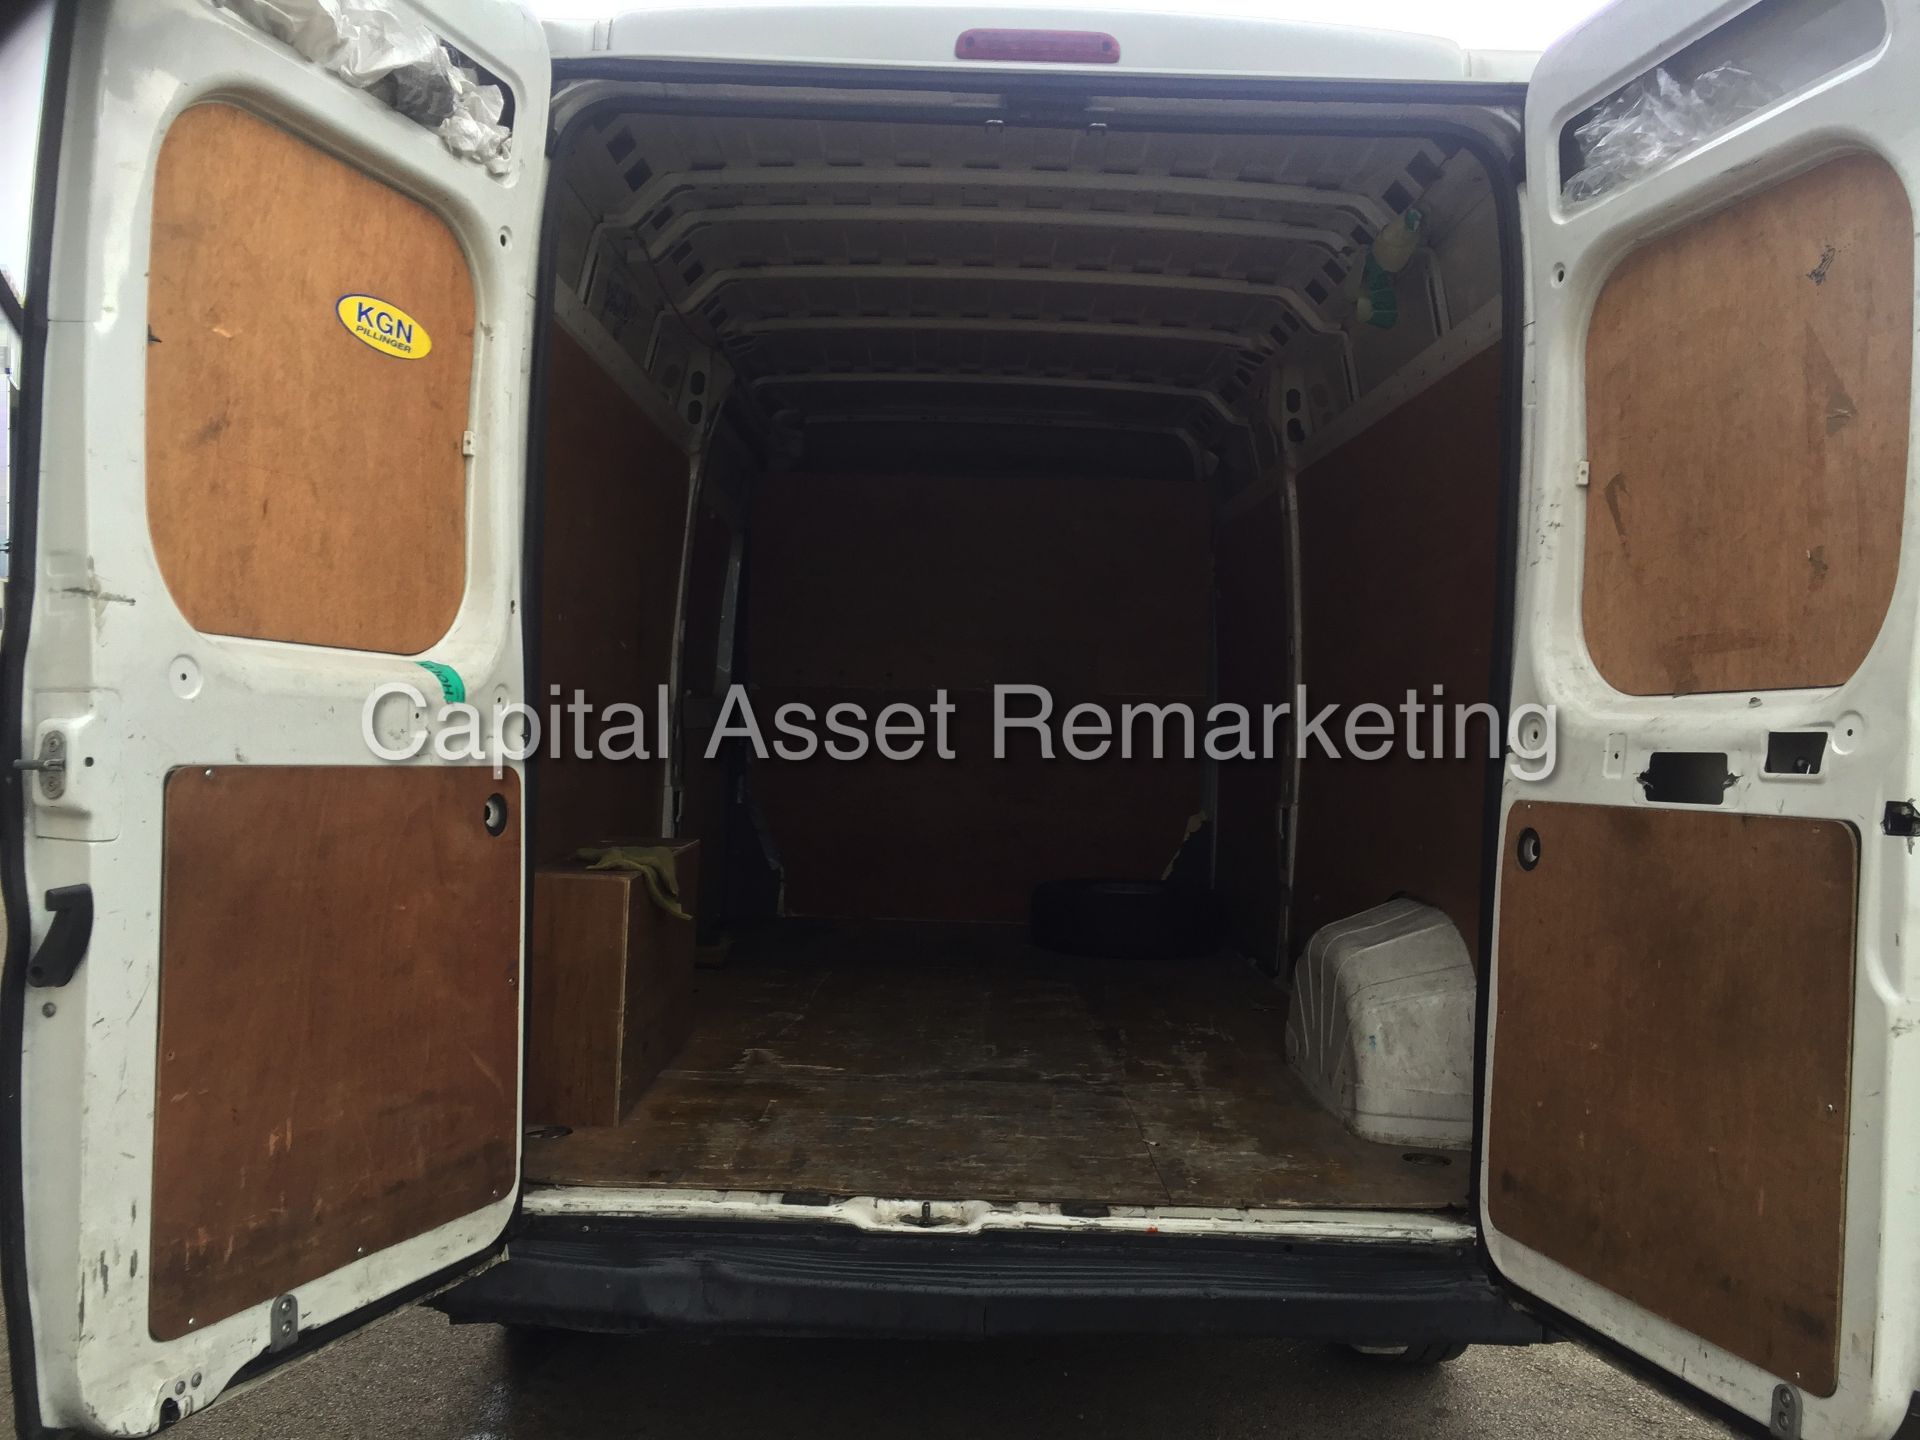 CITROEN RELAY 35 LWB HI-ROOF (2011 MODEL) 2.2 HDI - 120 PS - 6 SPEED (ELECTRIC PACK) - Image 13 of 19